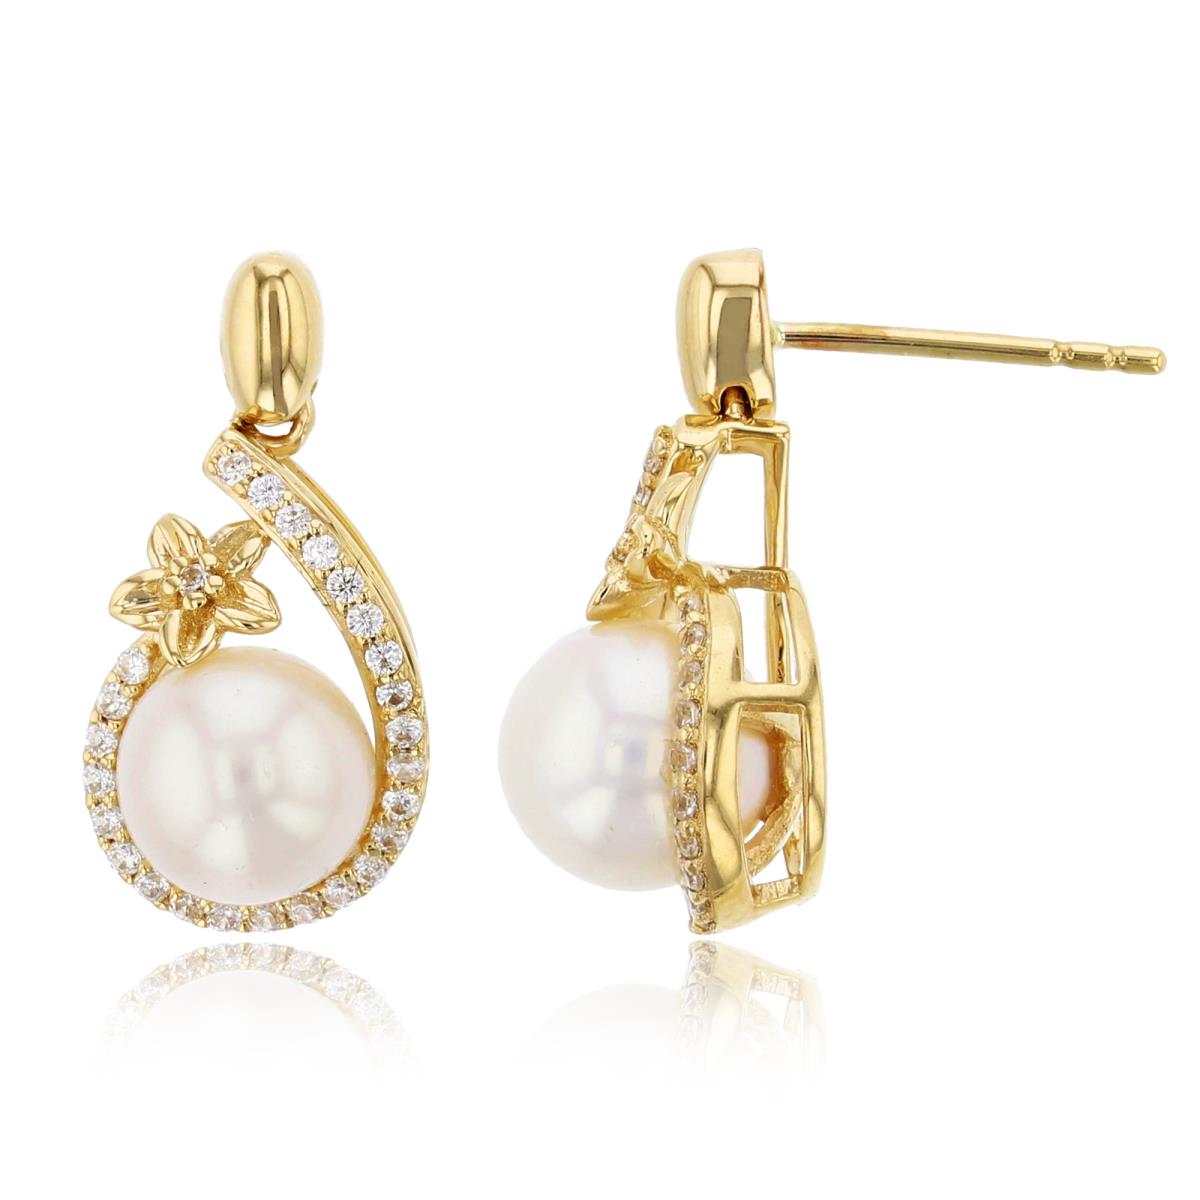 10K Yellow Gold 0.21 CTTW Rnd Diam & 7mm Rnd White Pearl with Flower PS-shape Earring